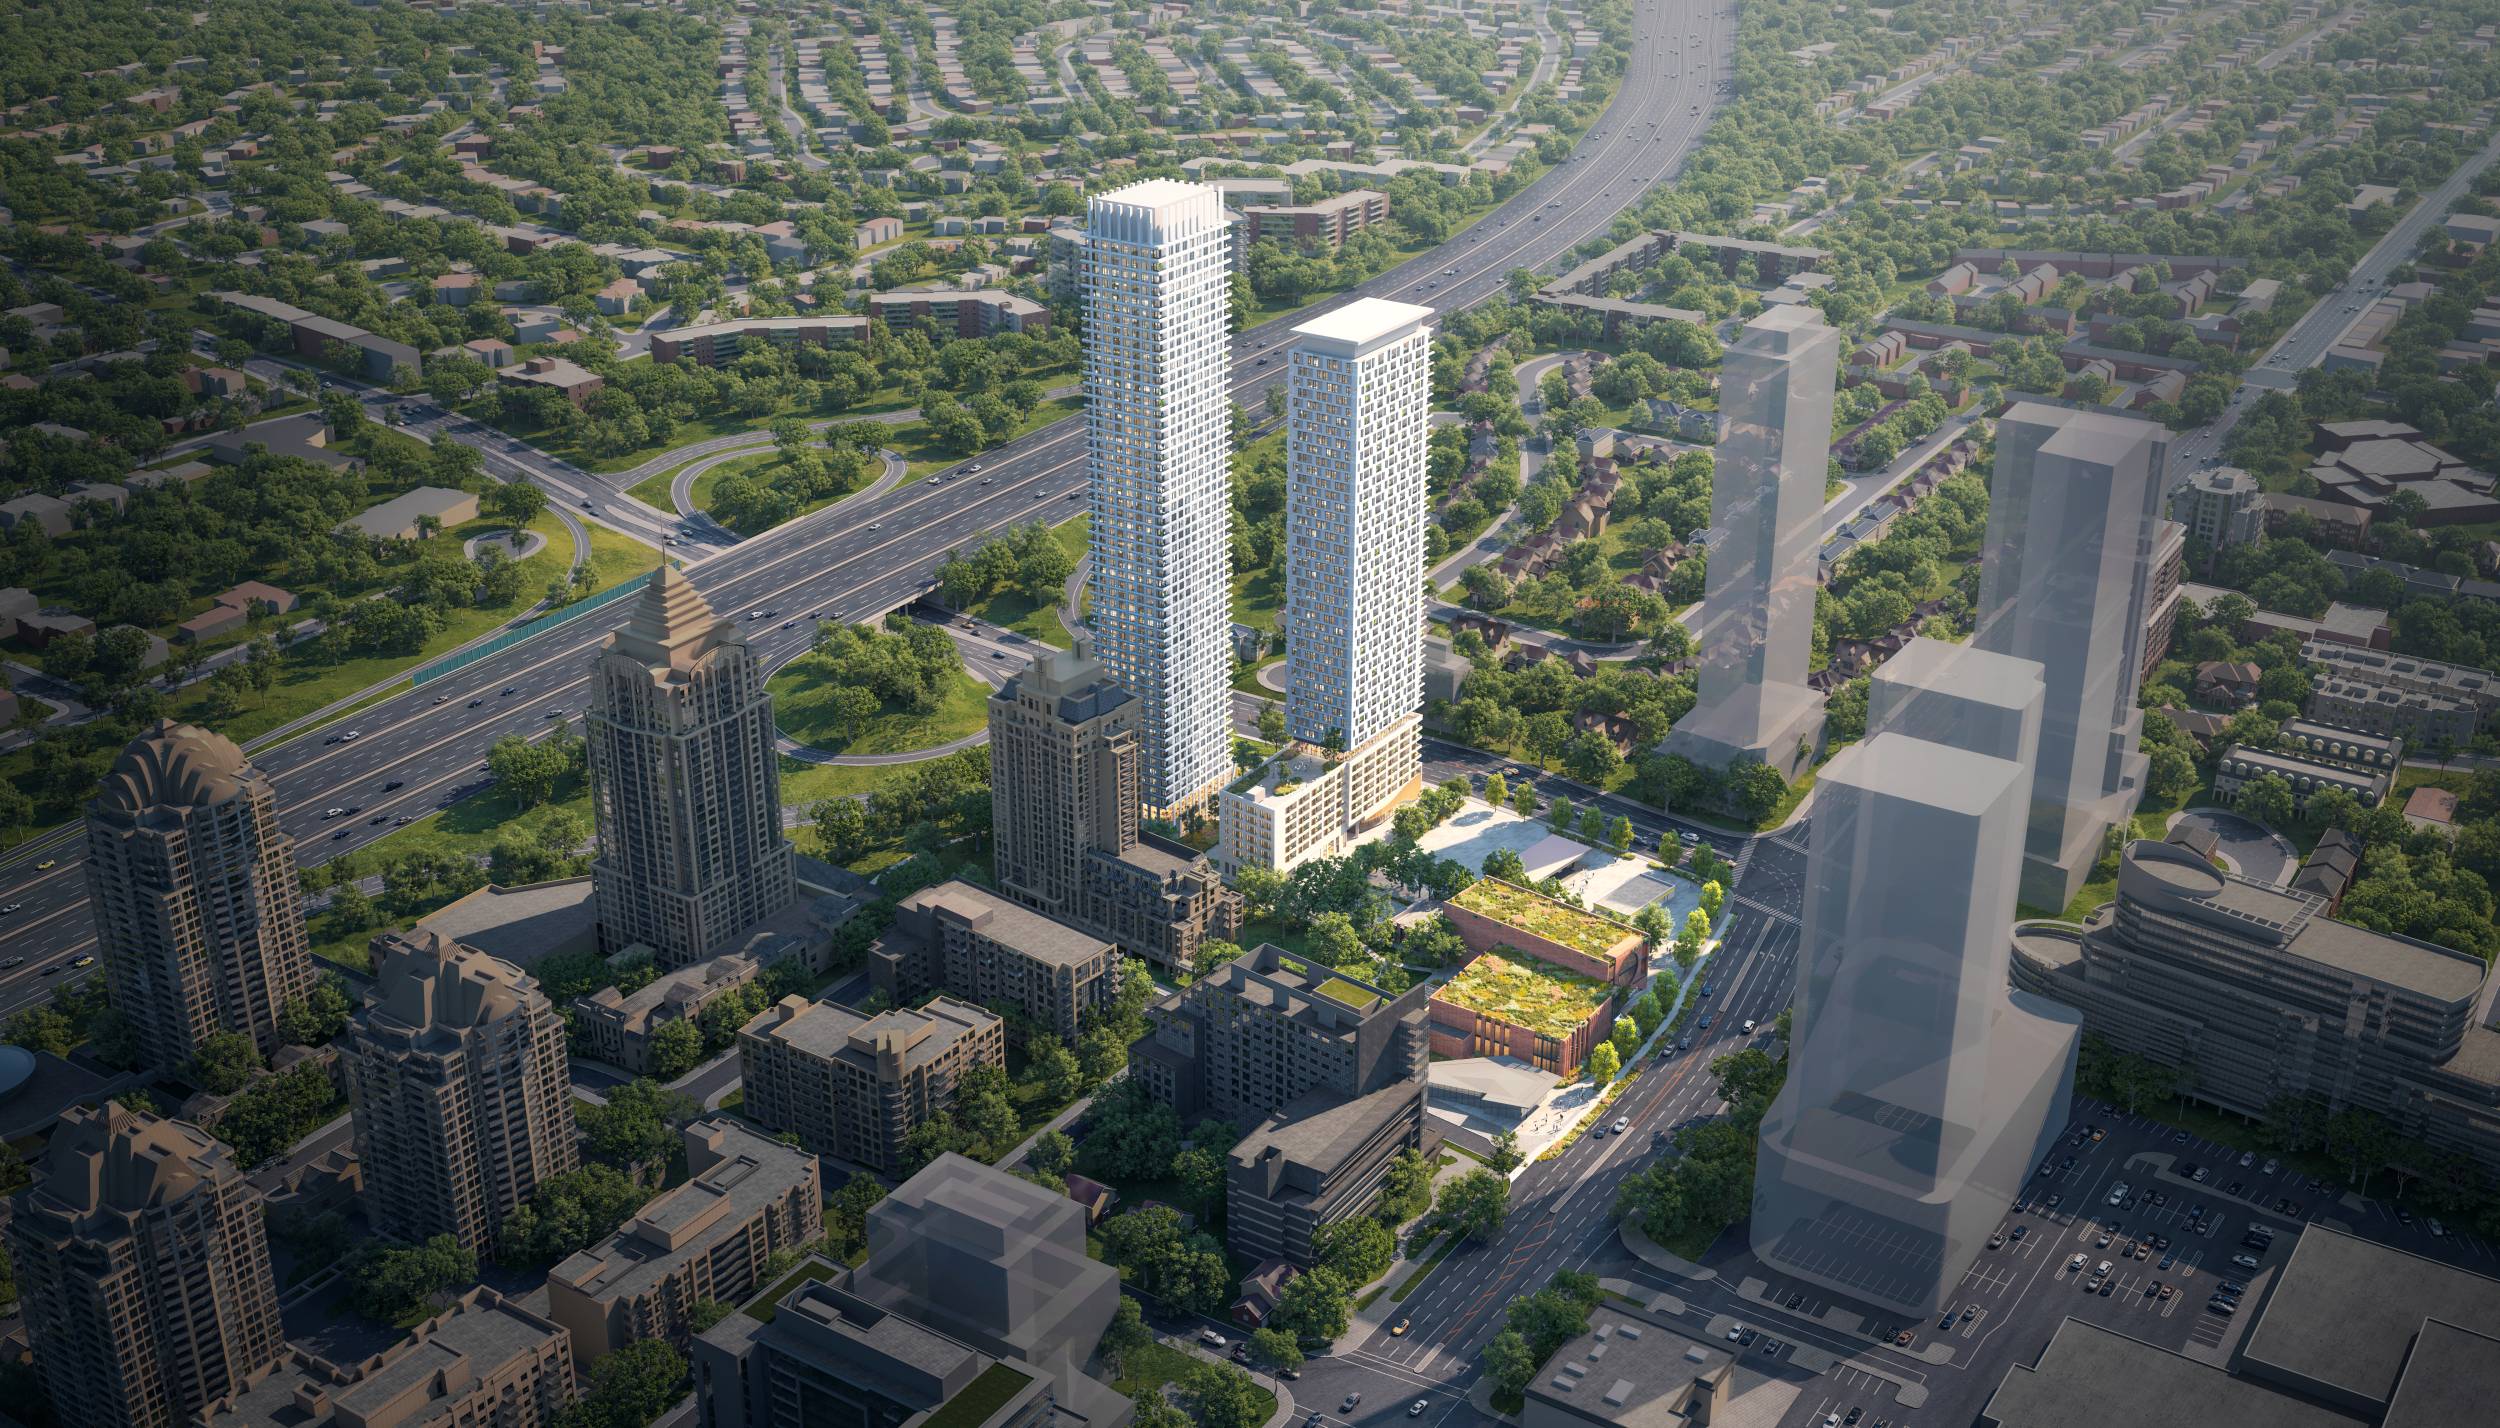 North East Aerial View of Proposed Building at 567 Sheppard Ave E